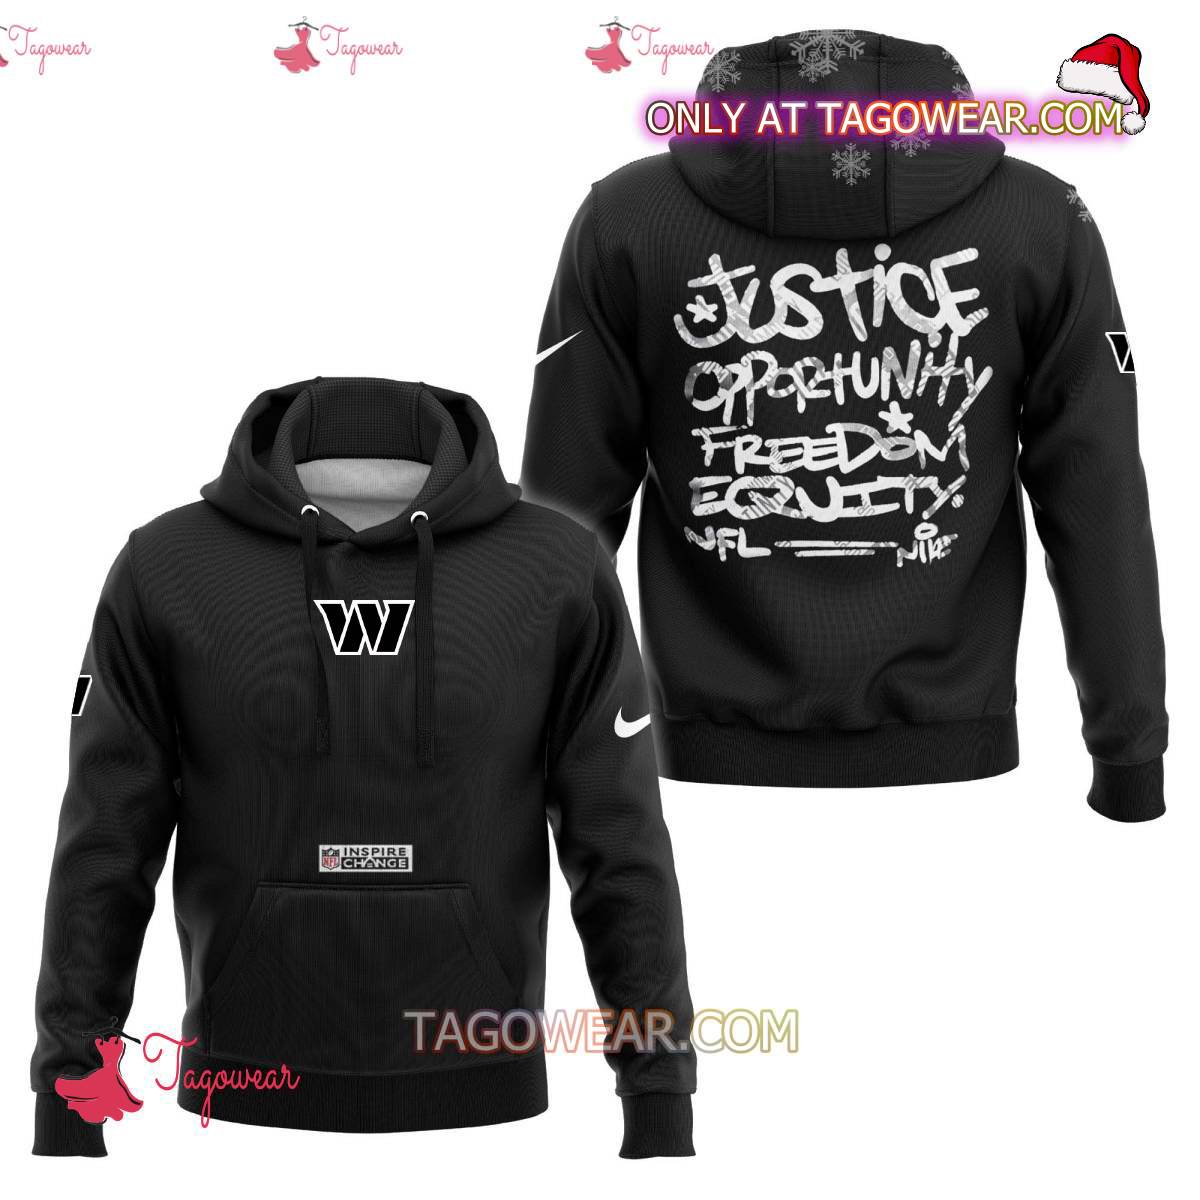 Washington Commanders NFL Inspire Change Justice Opportunity Equality Freedom Hoodie